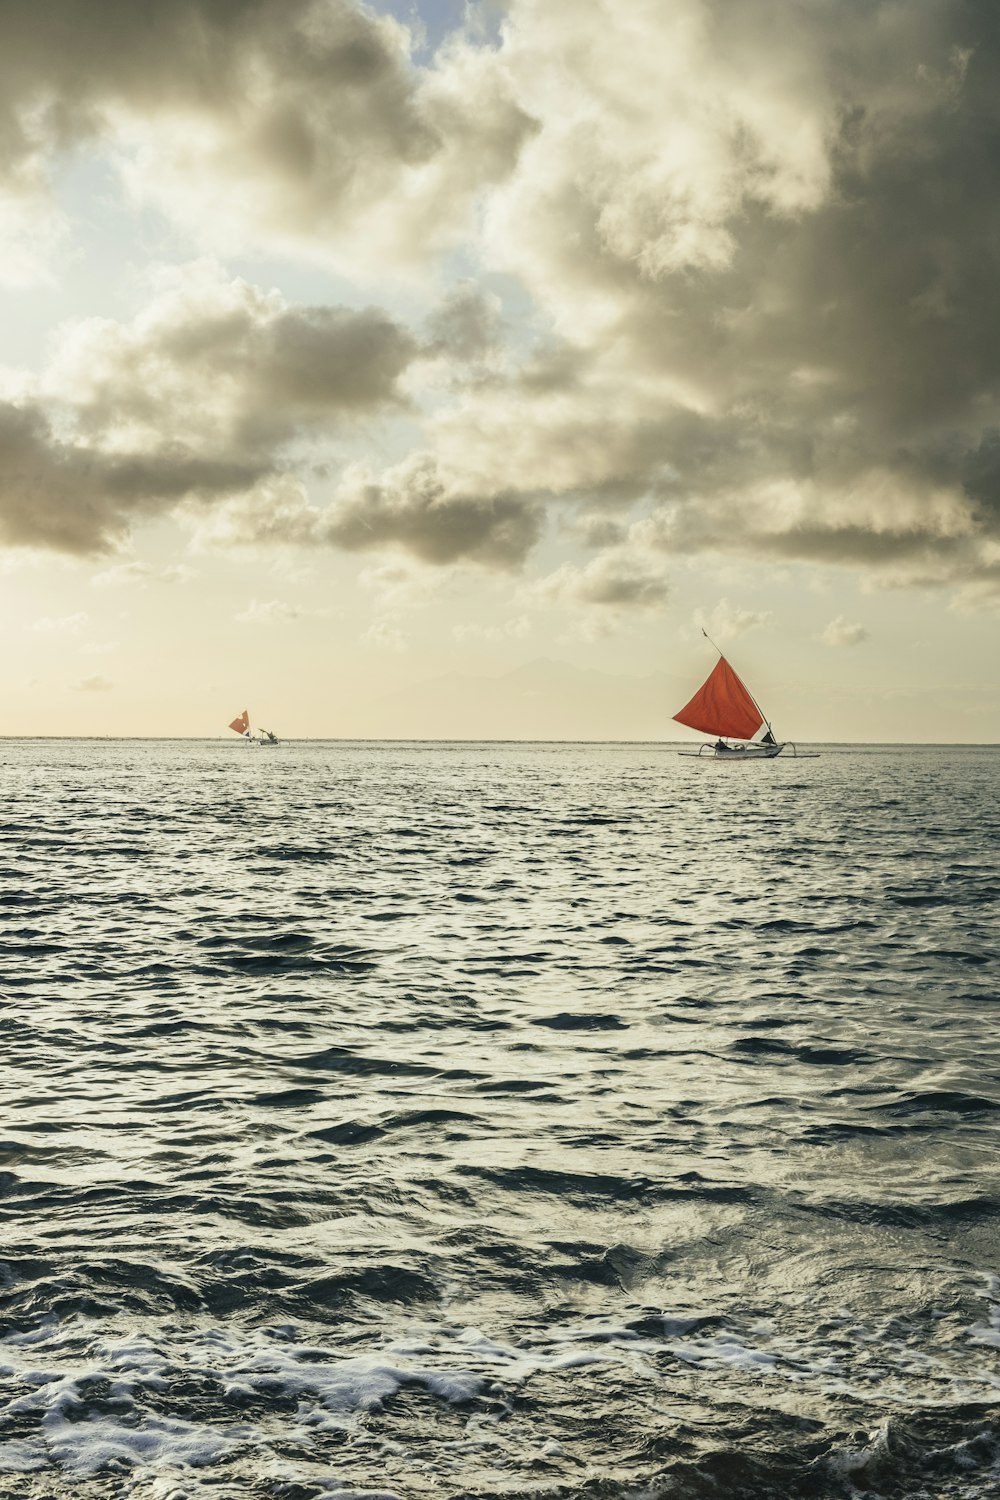 a group of sailboats on the water under a cloudy sky